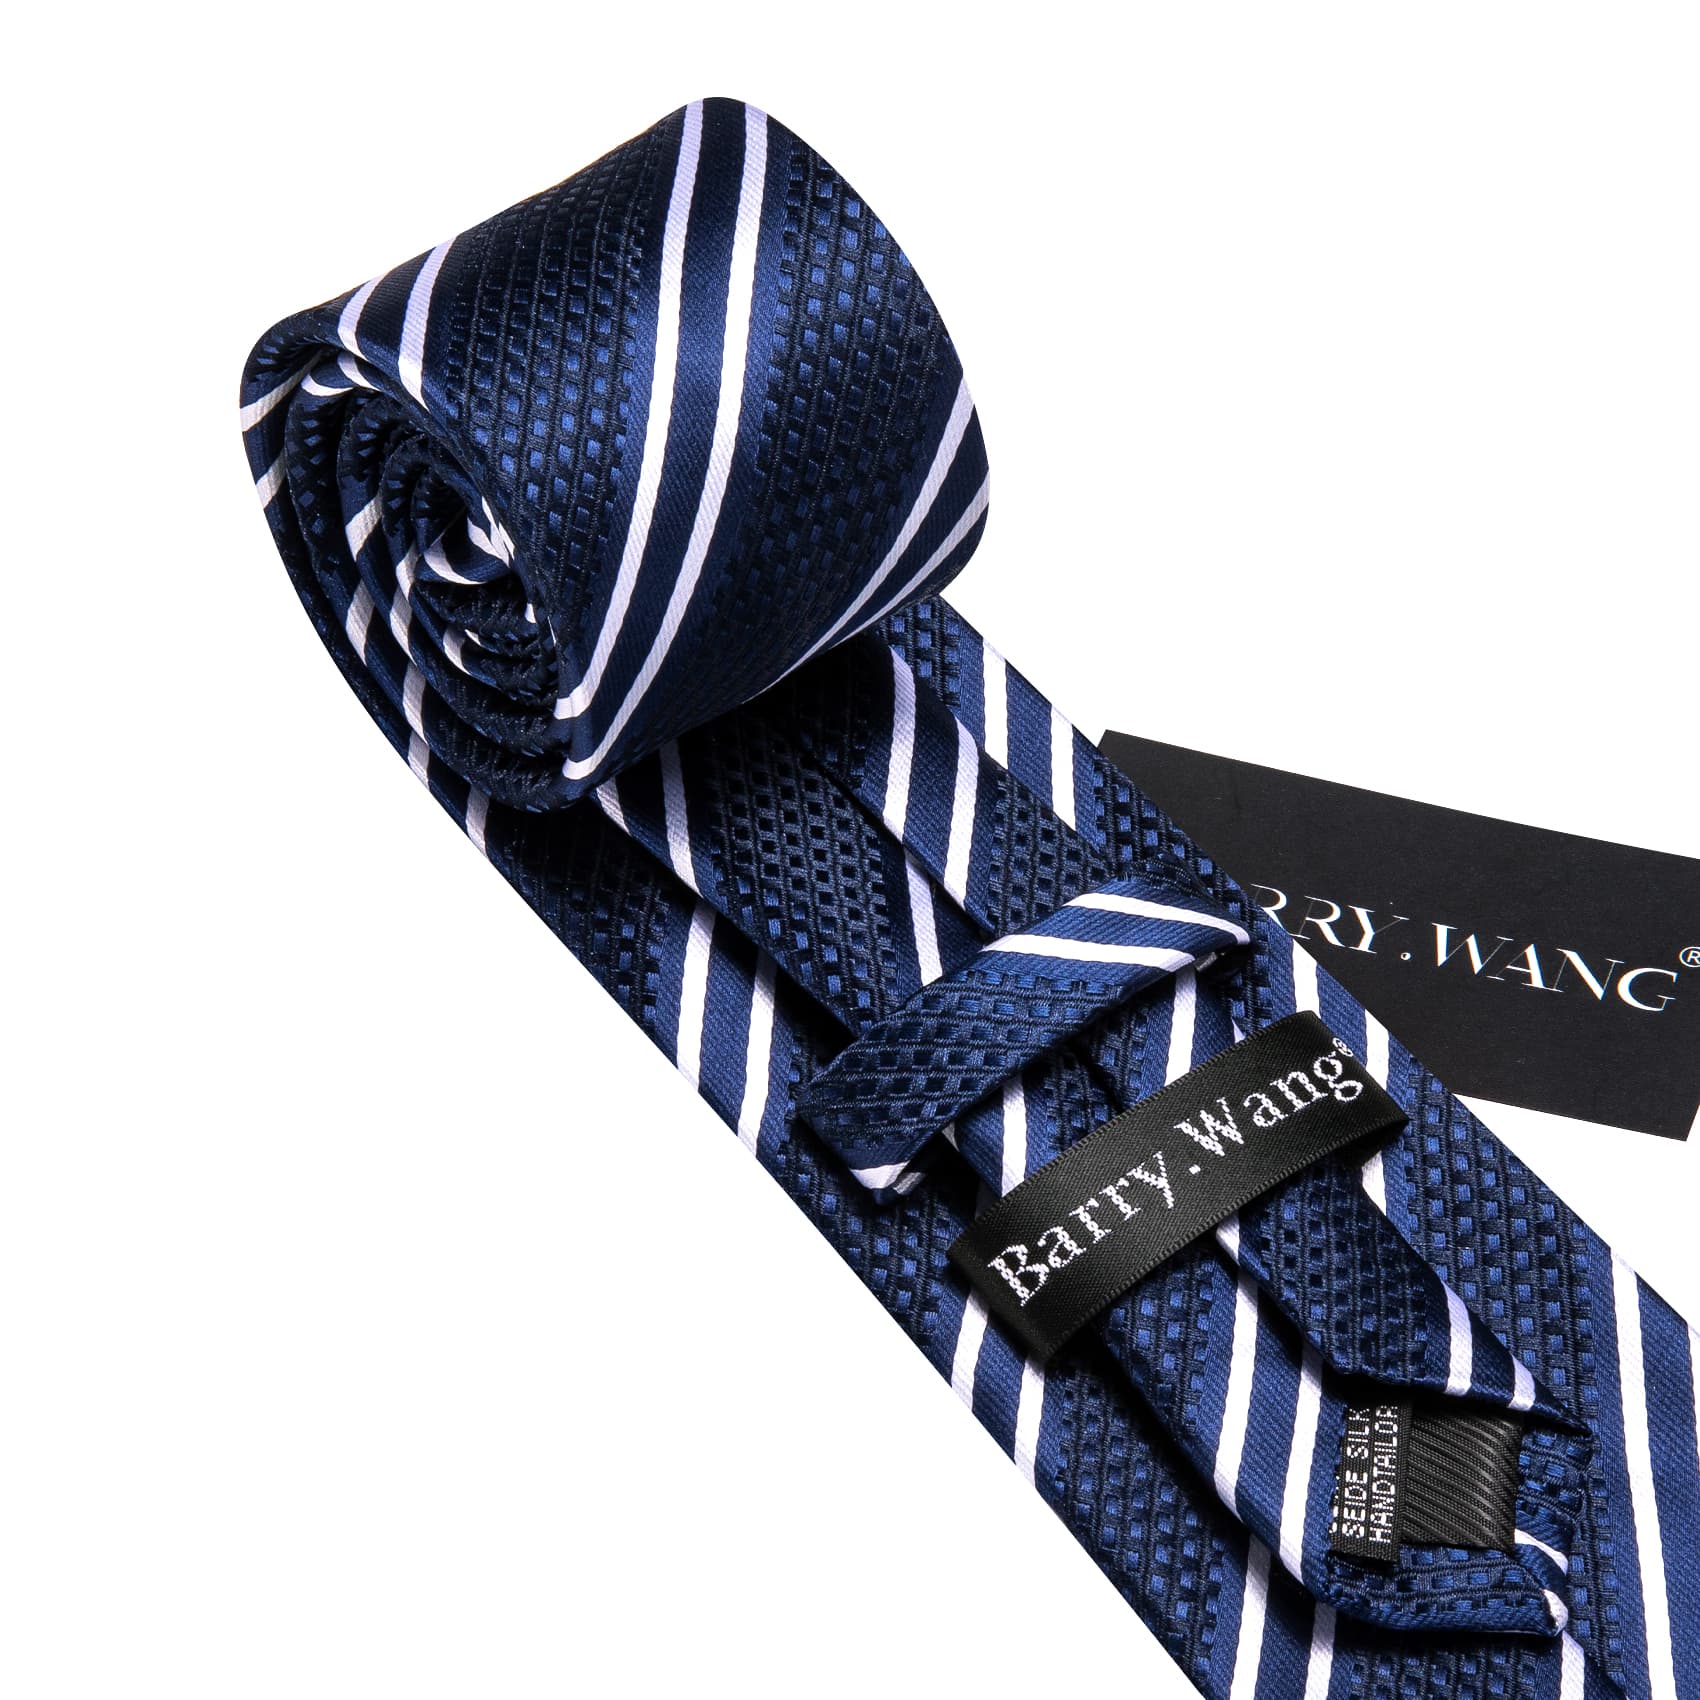  Blue Striped Tie with White Stripes Men's Business Set